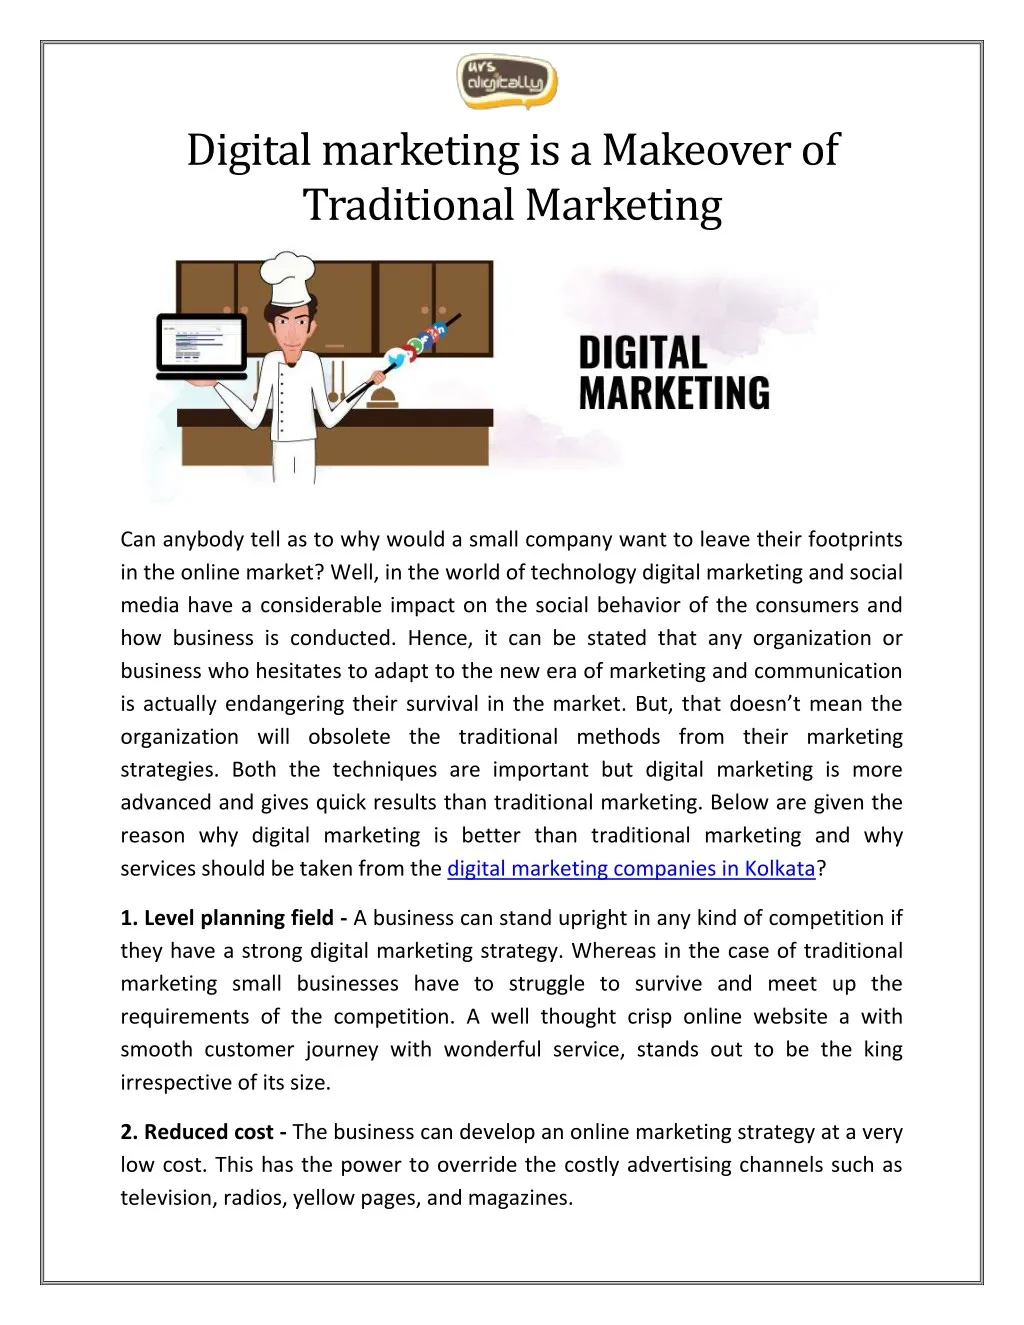 digital marketing is a makeover of traditional